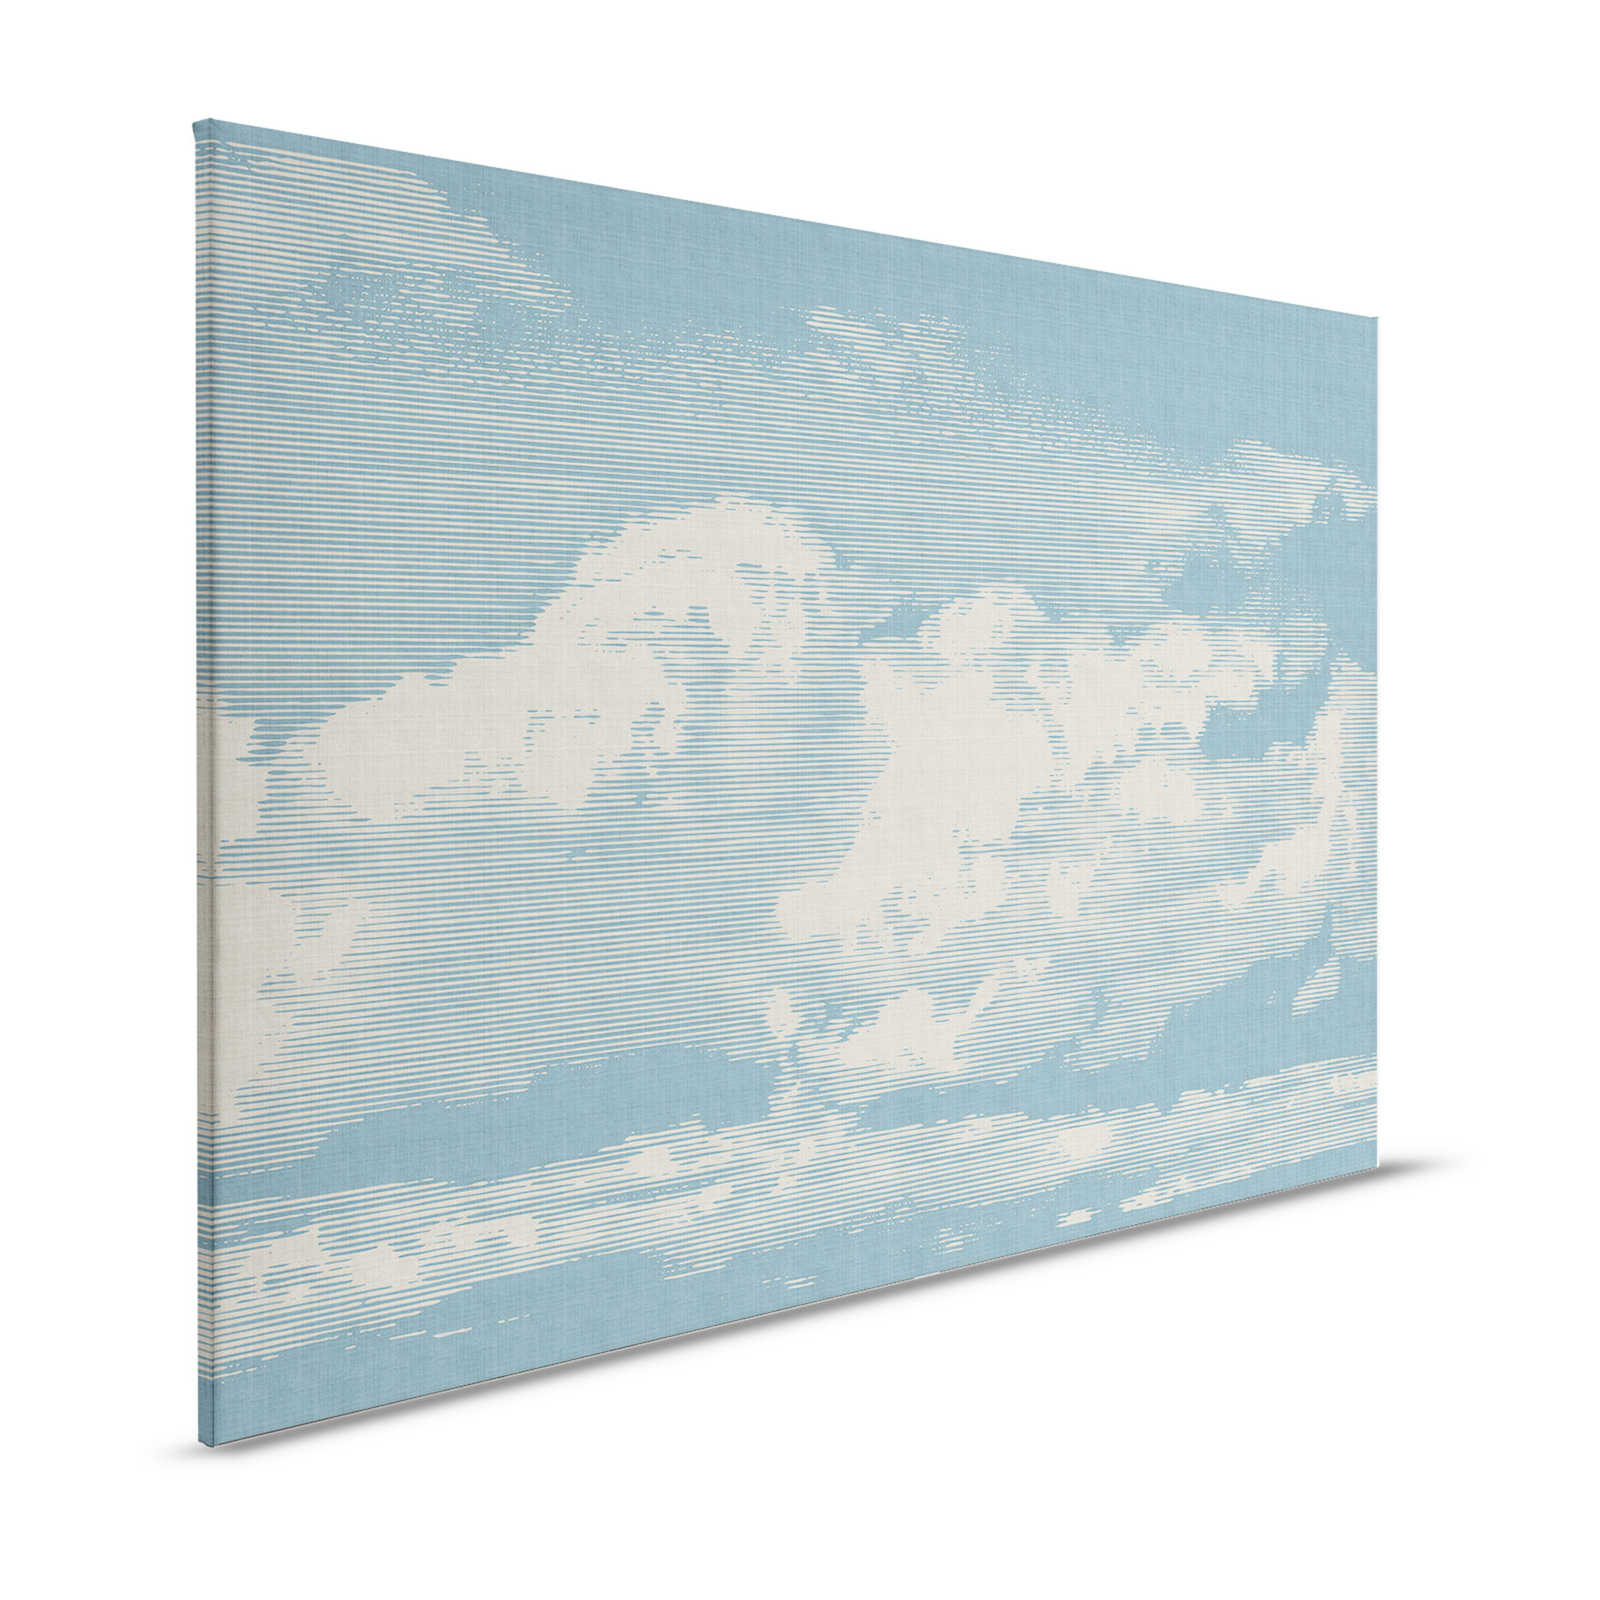 Clouds 1 - Heavenly canvas picture with cloud motif in natural linen look - 1.20 m x 0.80 m
